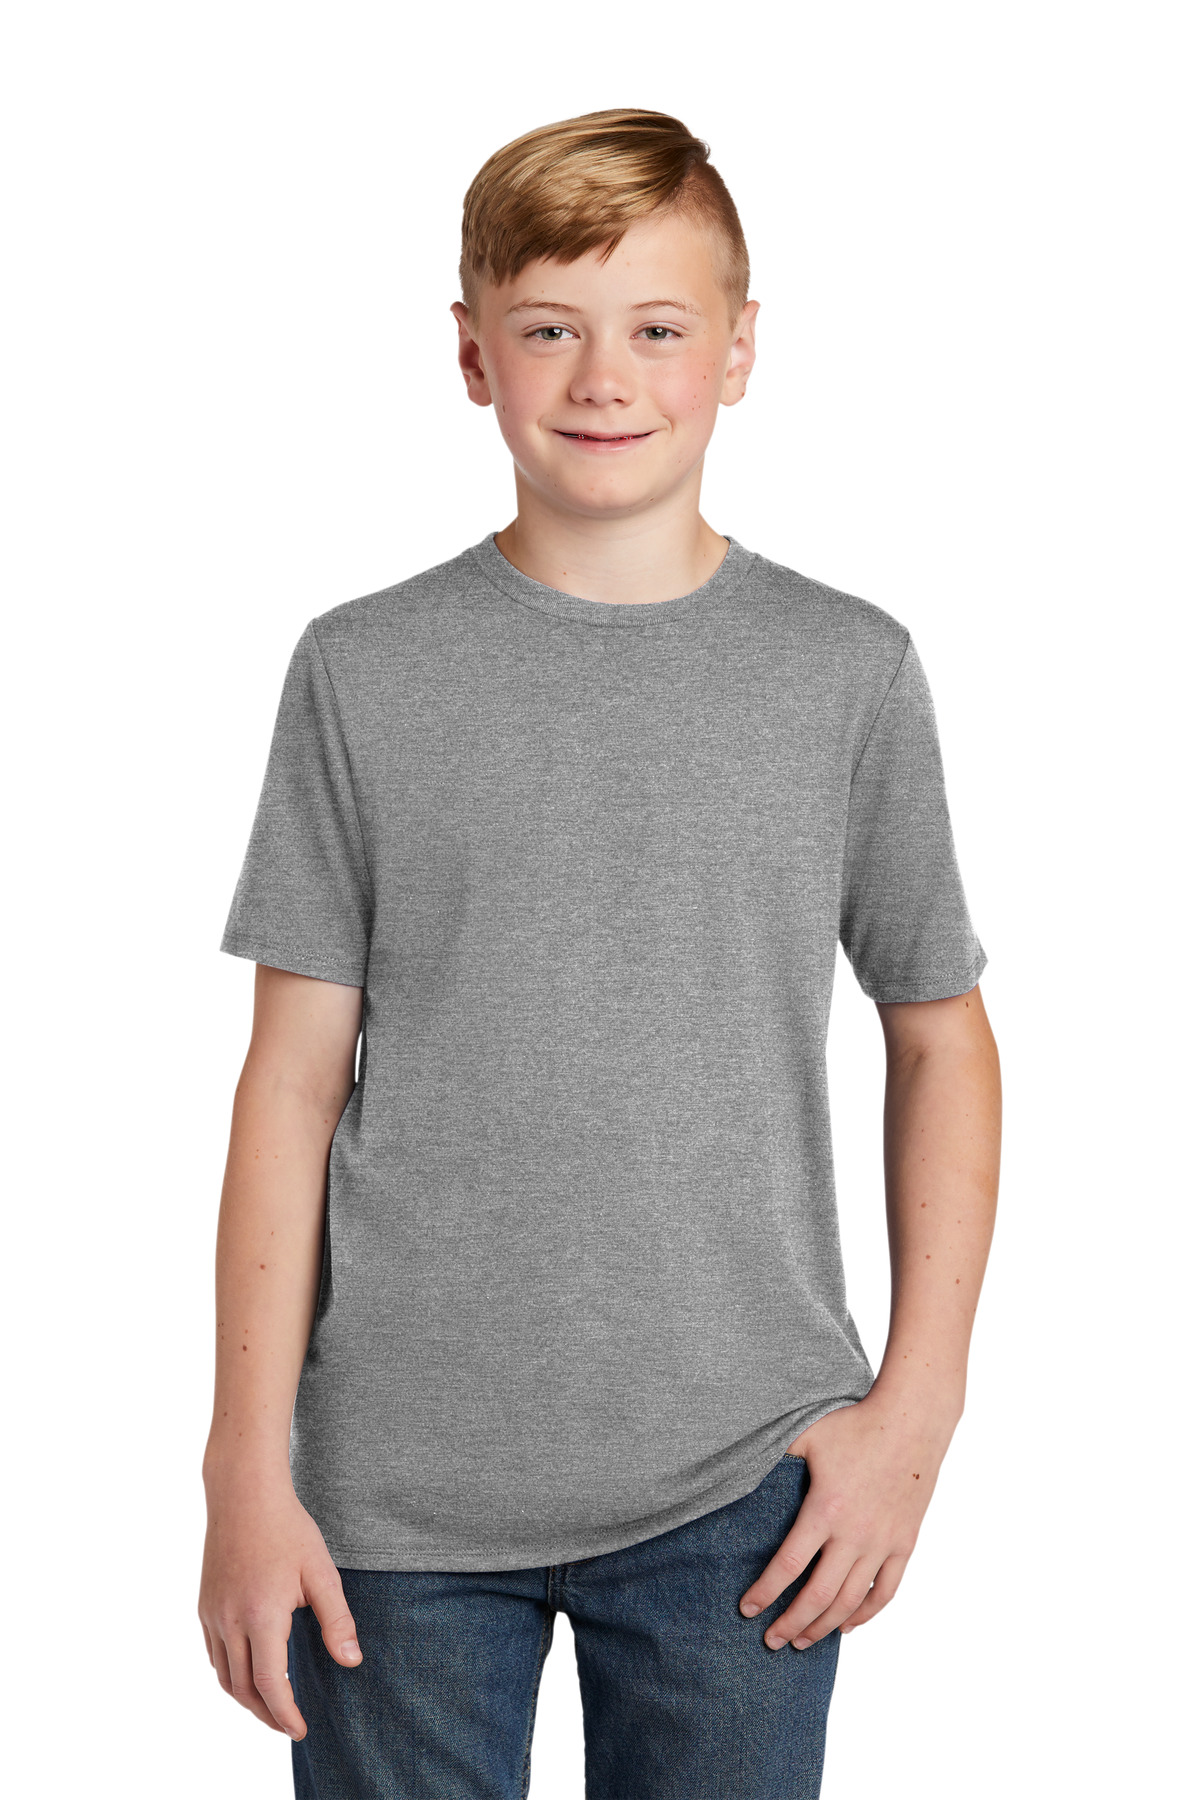 District Hospitality Youth T-Shirts ® Youth Perfect Tri ®Tee.-District